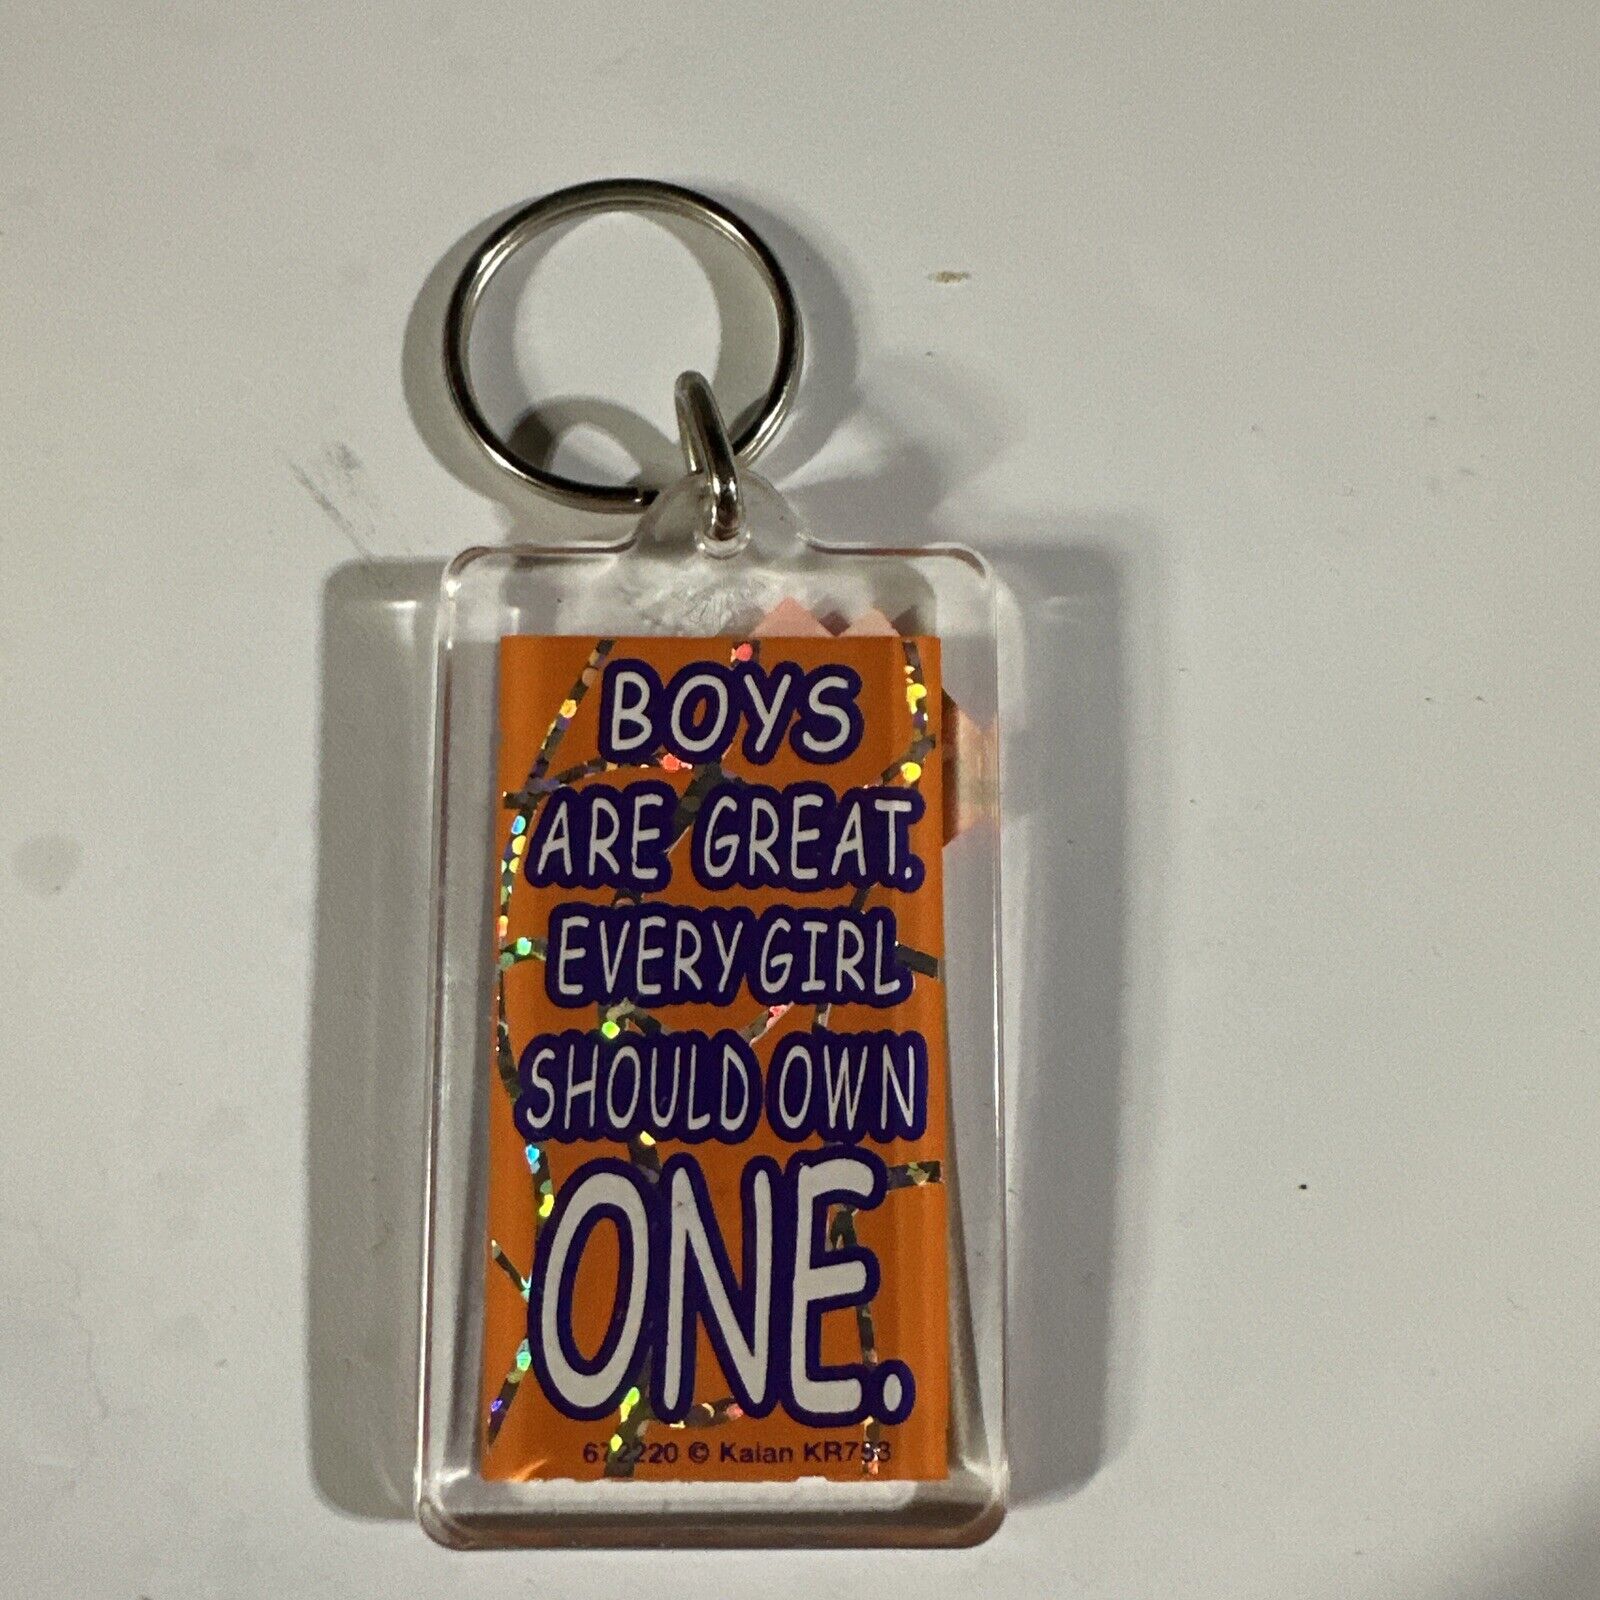 Boys Are Great. Every Girl Should Own One. ~ Vintage Key Fob Keychain